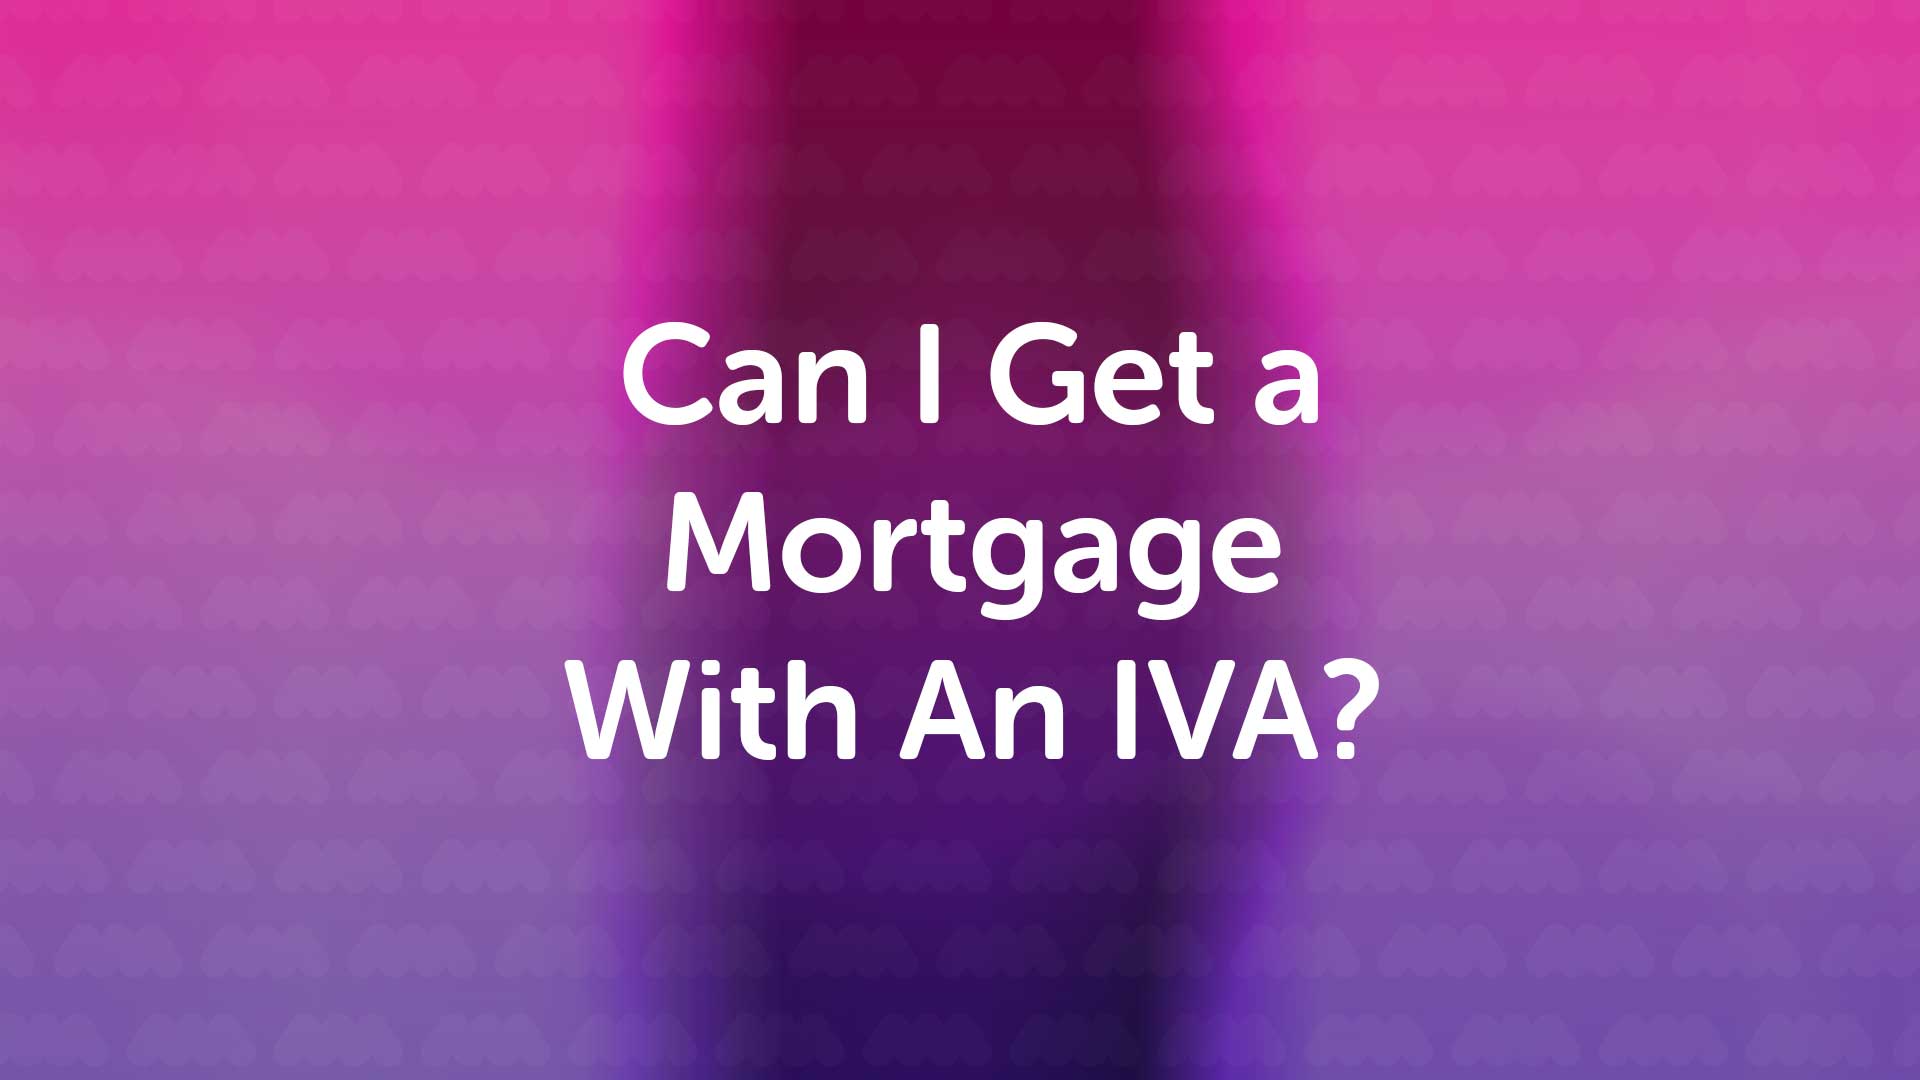 Can I get a mortgage with an IVA? - Mortgage Advice - Mortgage Broker - Mortgage Advisor